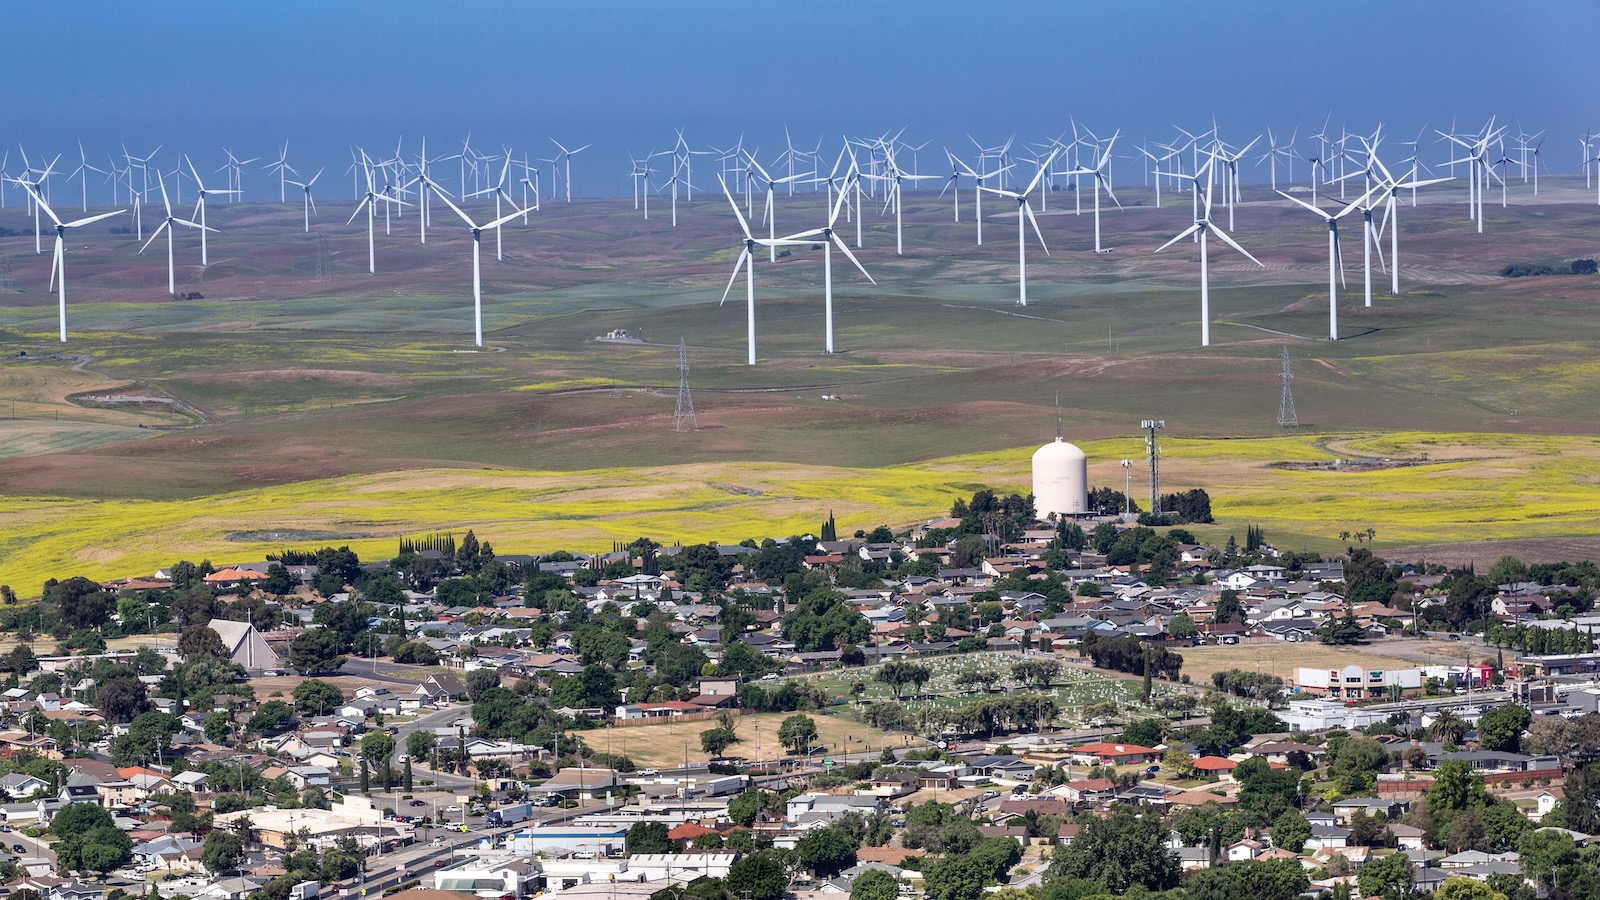 A vast field full of towering wind turbines is seen in the background with the small town of Rio Vista, California in the foreground.